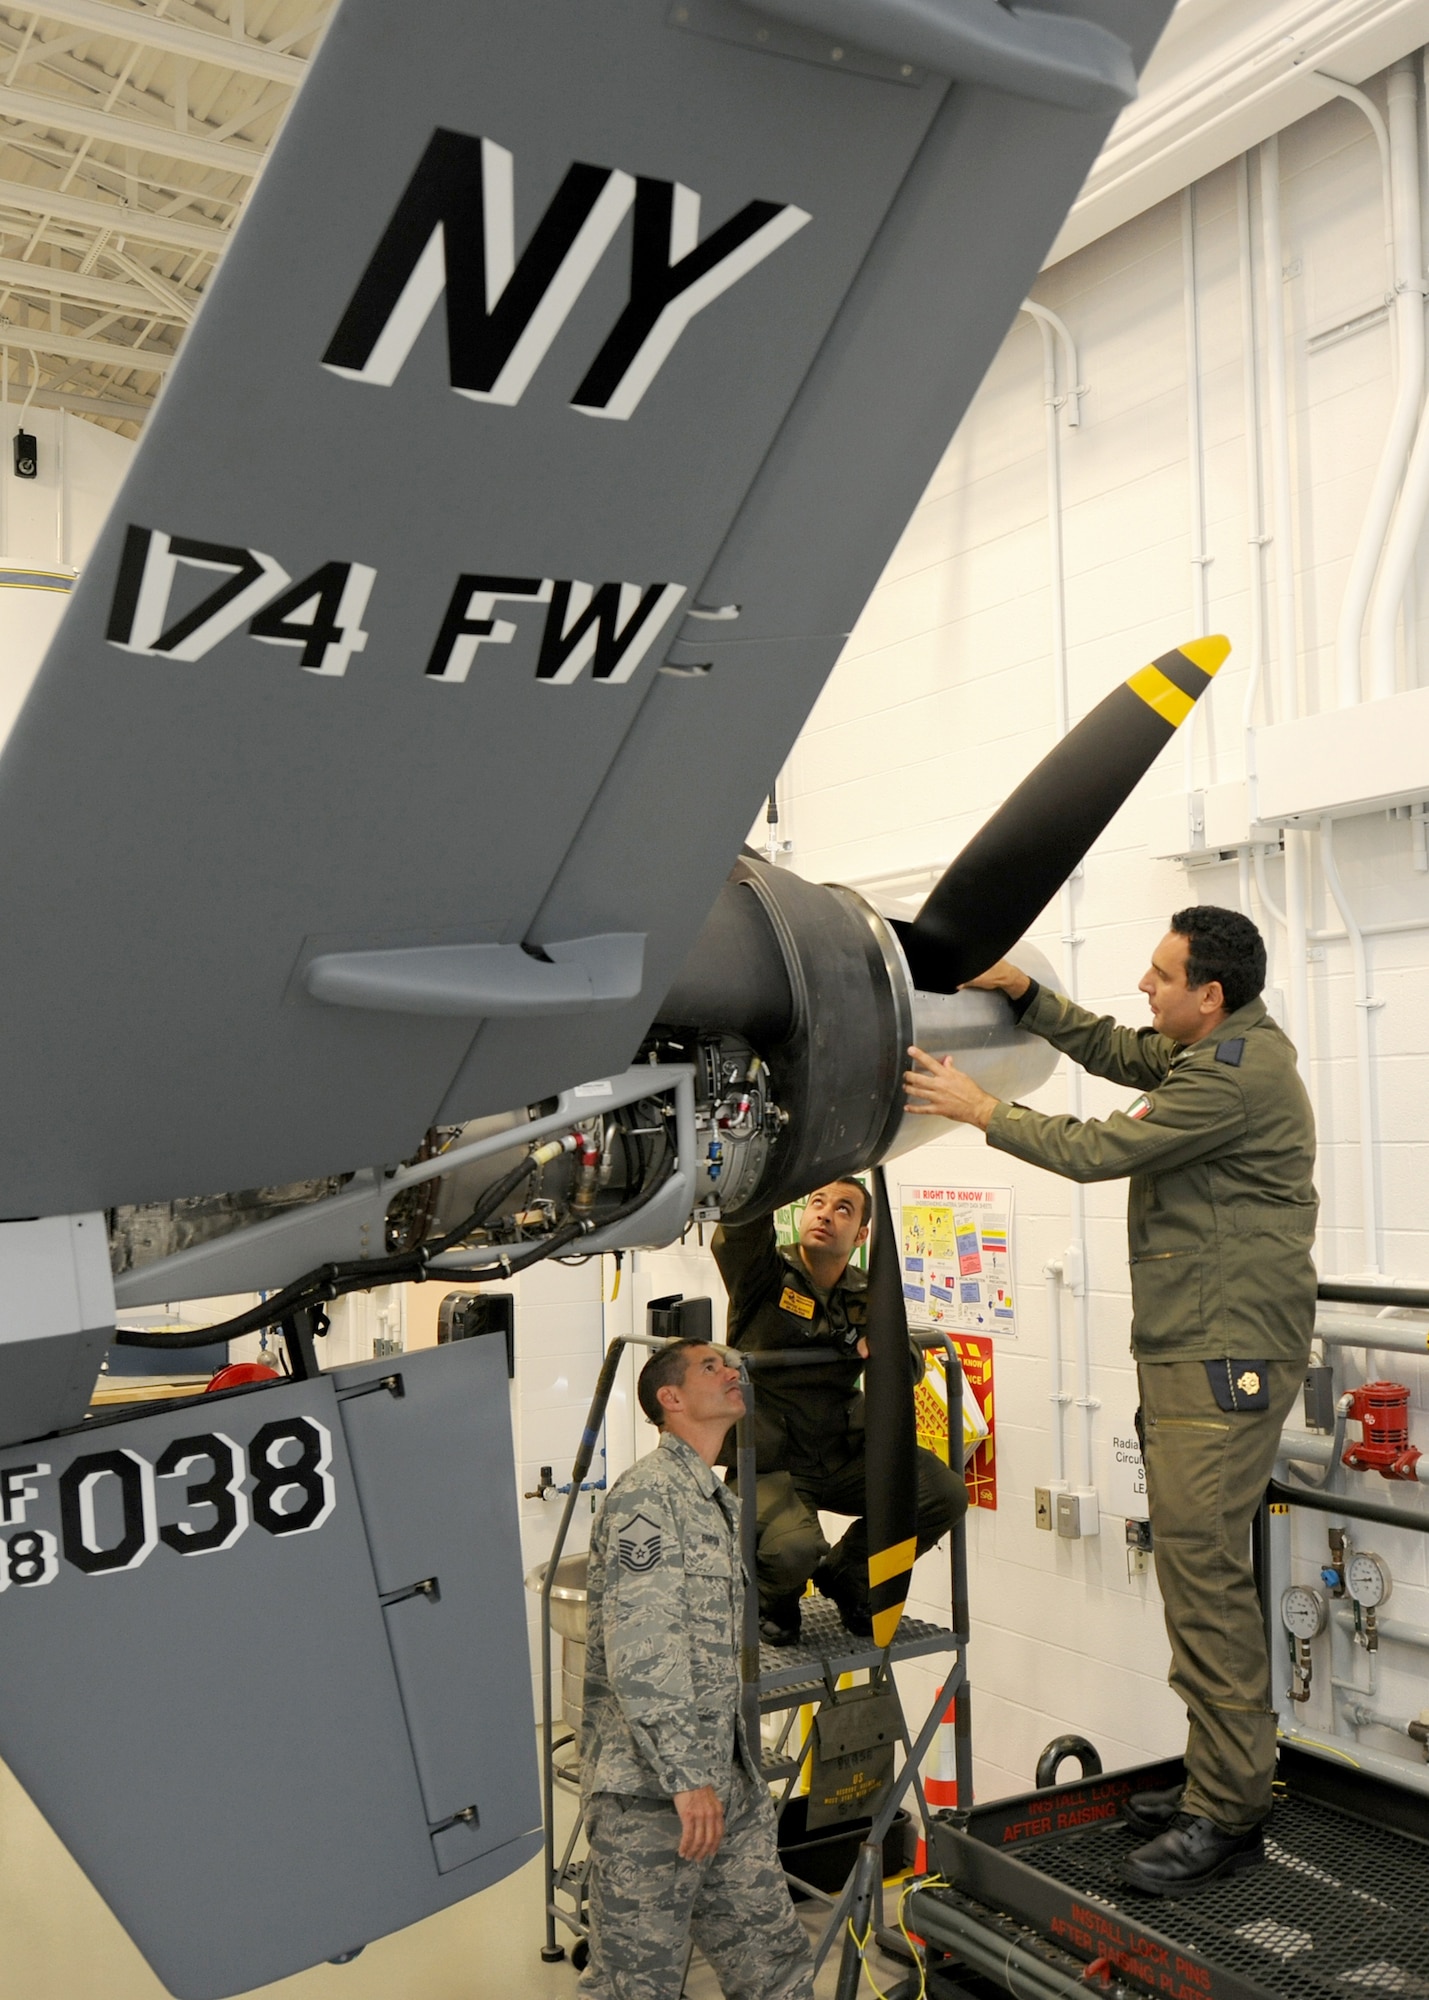 Italian Air Force Chief Warrant Officer Lorenzo Scafuto and Staff Sgt. Marco Redavide work together on a MQ-9, while receiving feedback from their instructor Master Sgt. Scott Simpson at the Field Training Detachment (FTD) in Syracuse NY, on 20 Sept 2011.  Scafuto and Redavide are the first Italian Air Force members to receive formal maintenance training on the MQ-9.  They are part of the 100th graduating class from the 174 FW FTD, which is the sole formal MQ-9 maintenance training facility in the U.S. Air Force. (Photo by Staff Sgt Ricky Best)